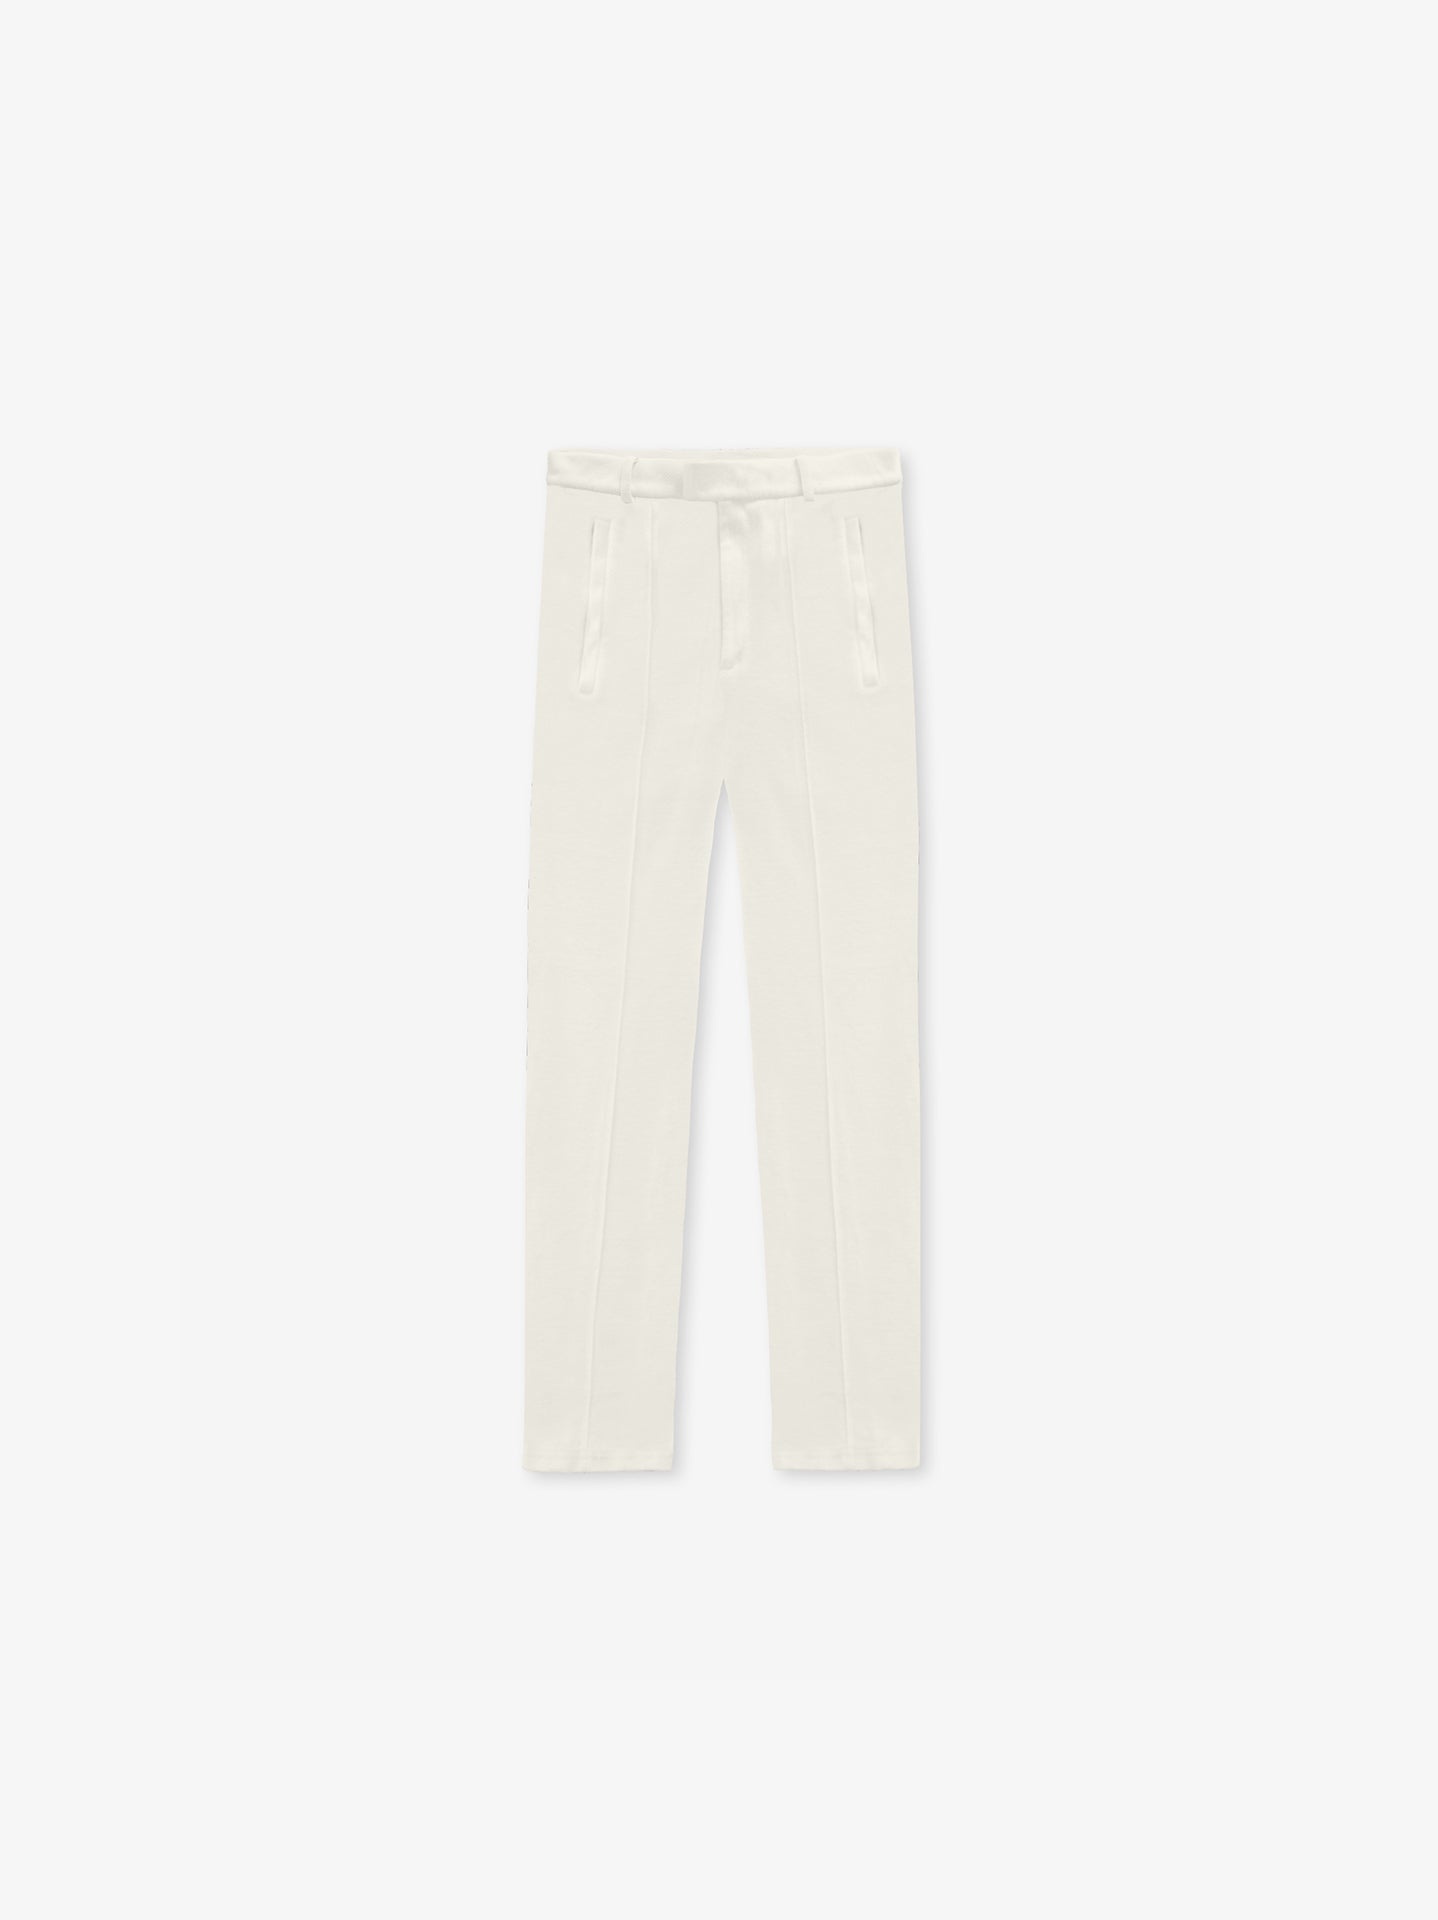 Inside Out Tailored Pants - Off White